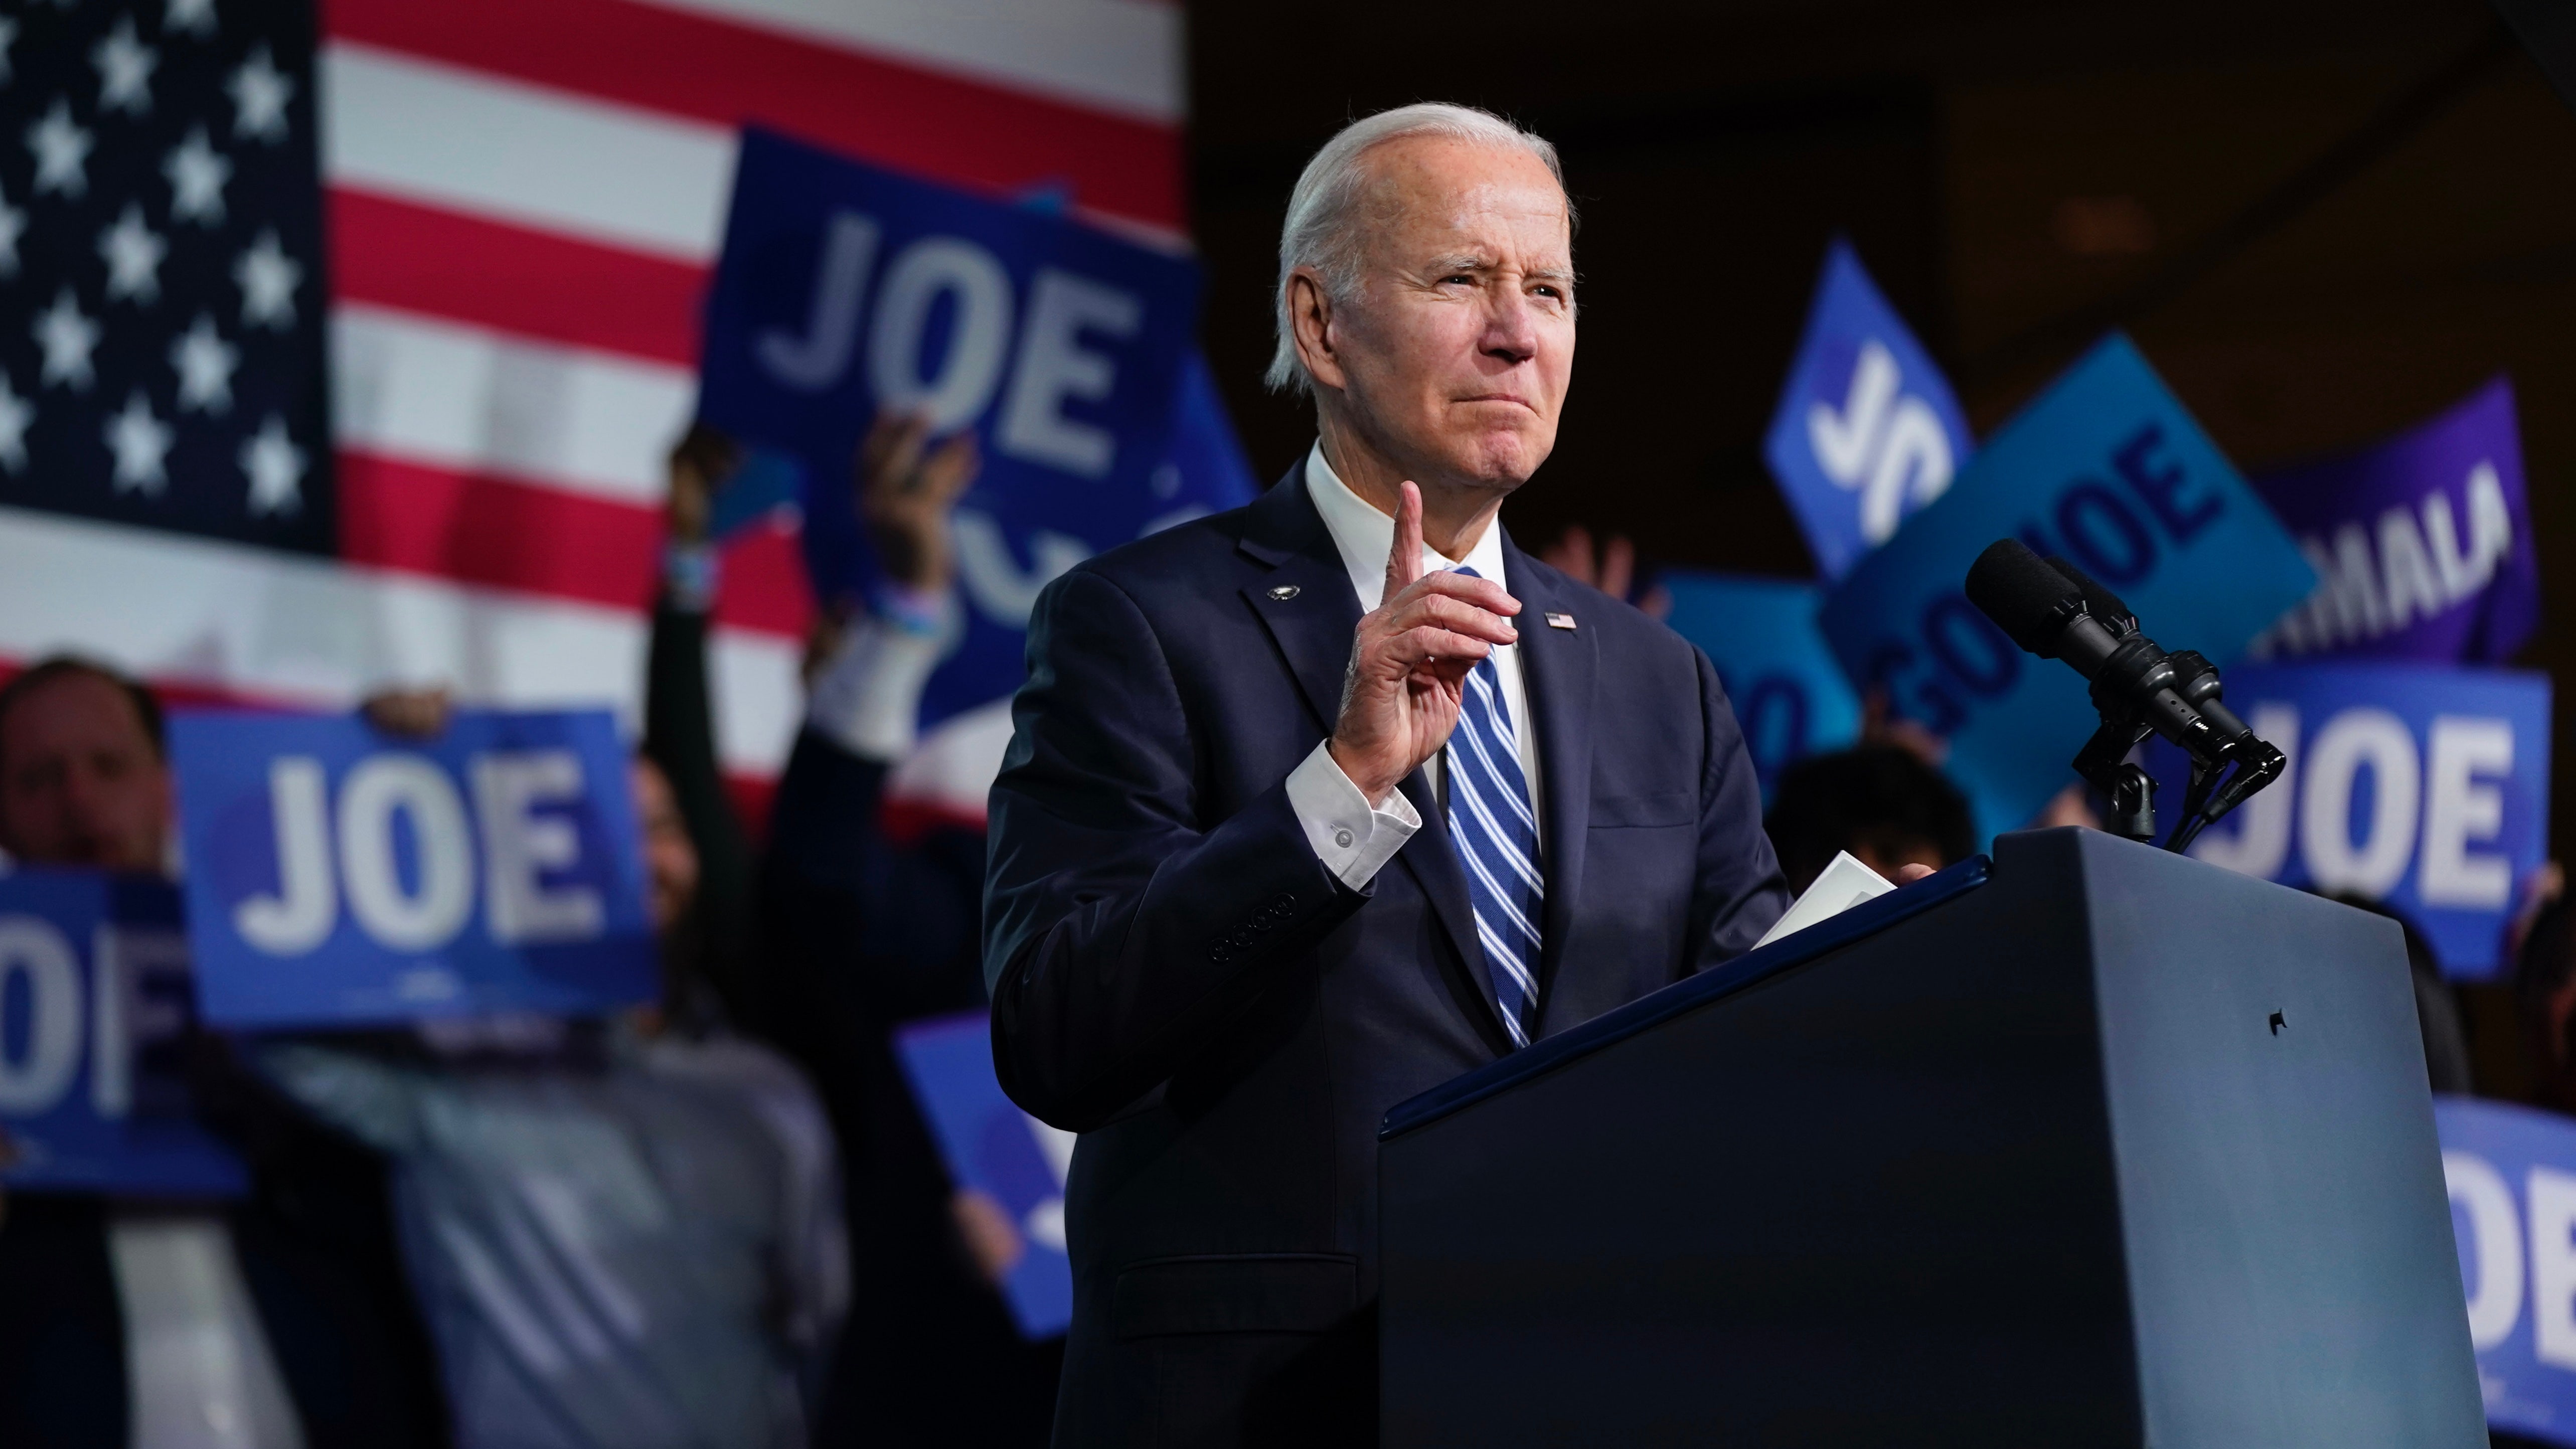 Only a quarter of Democrats want President Biden to run for reelection